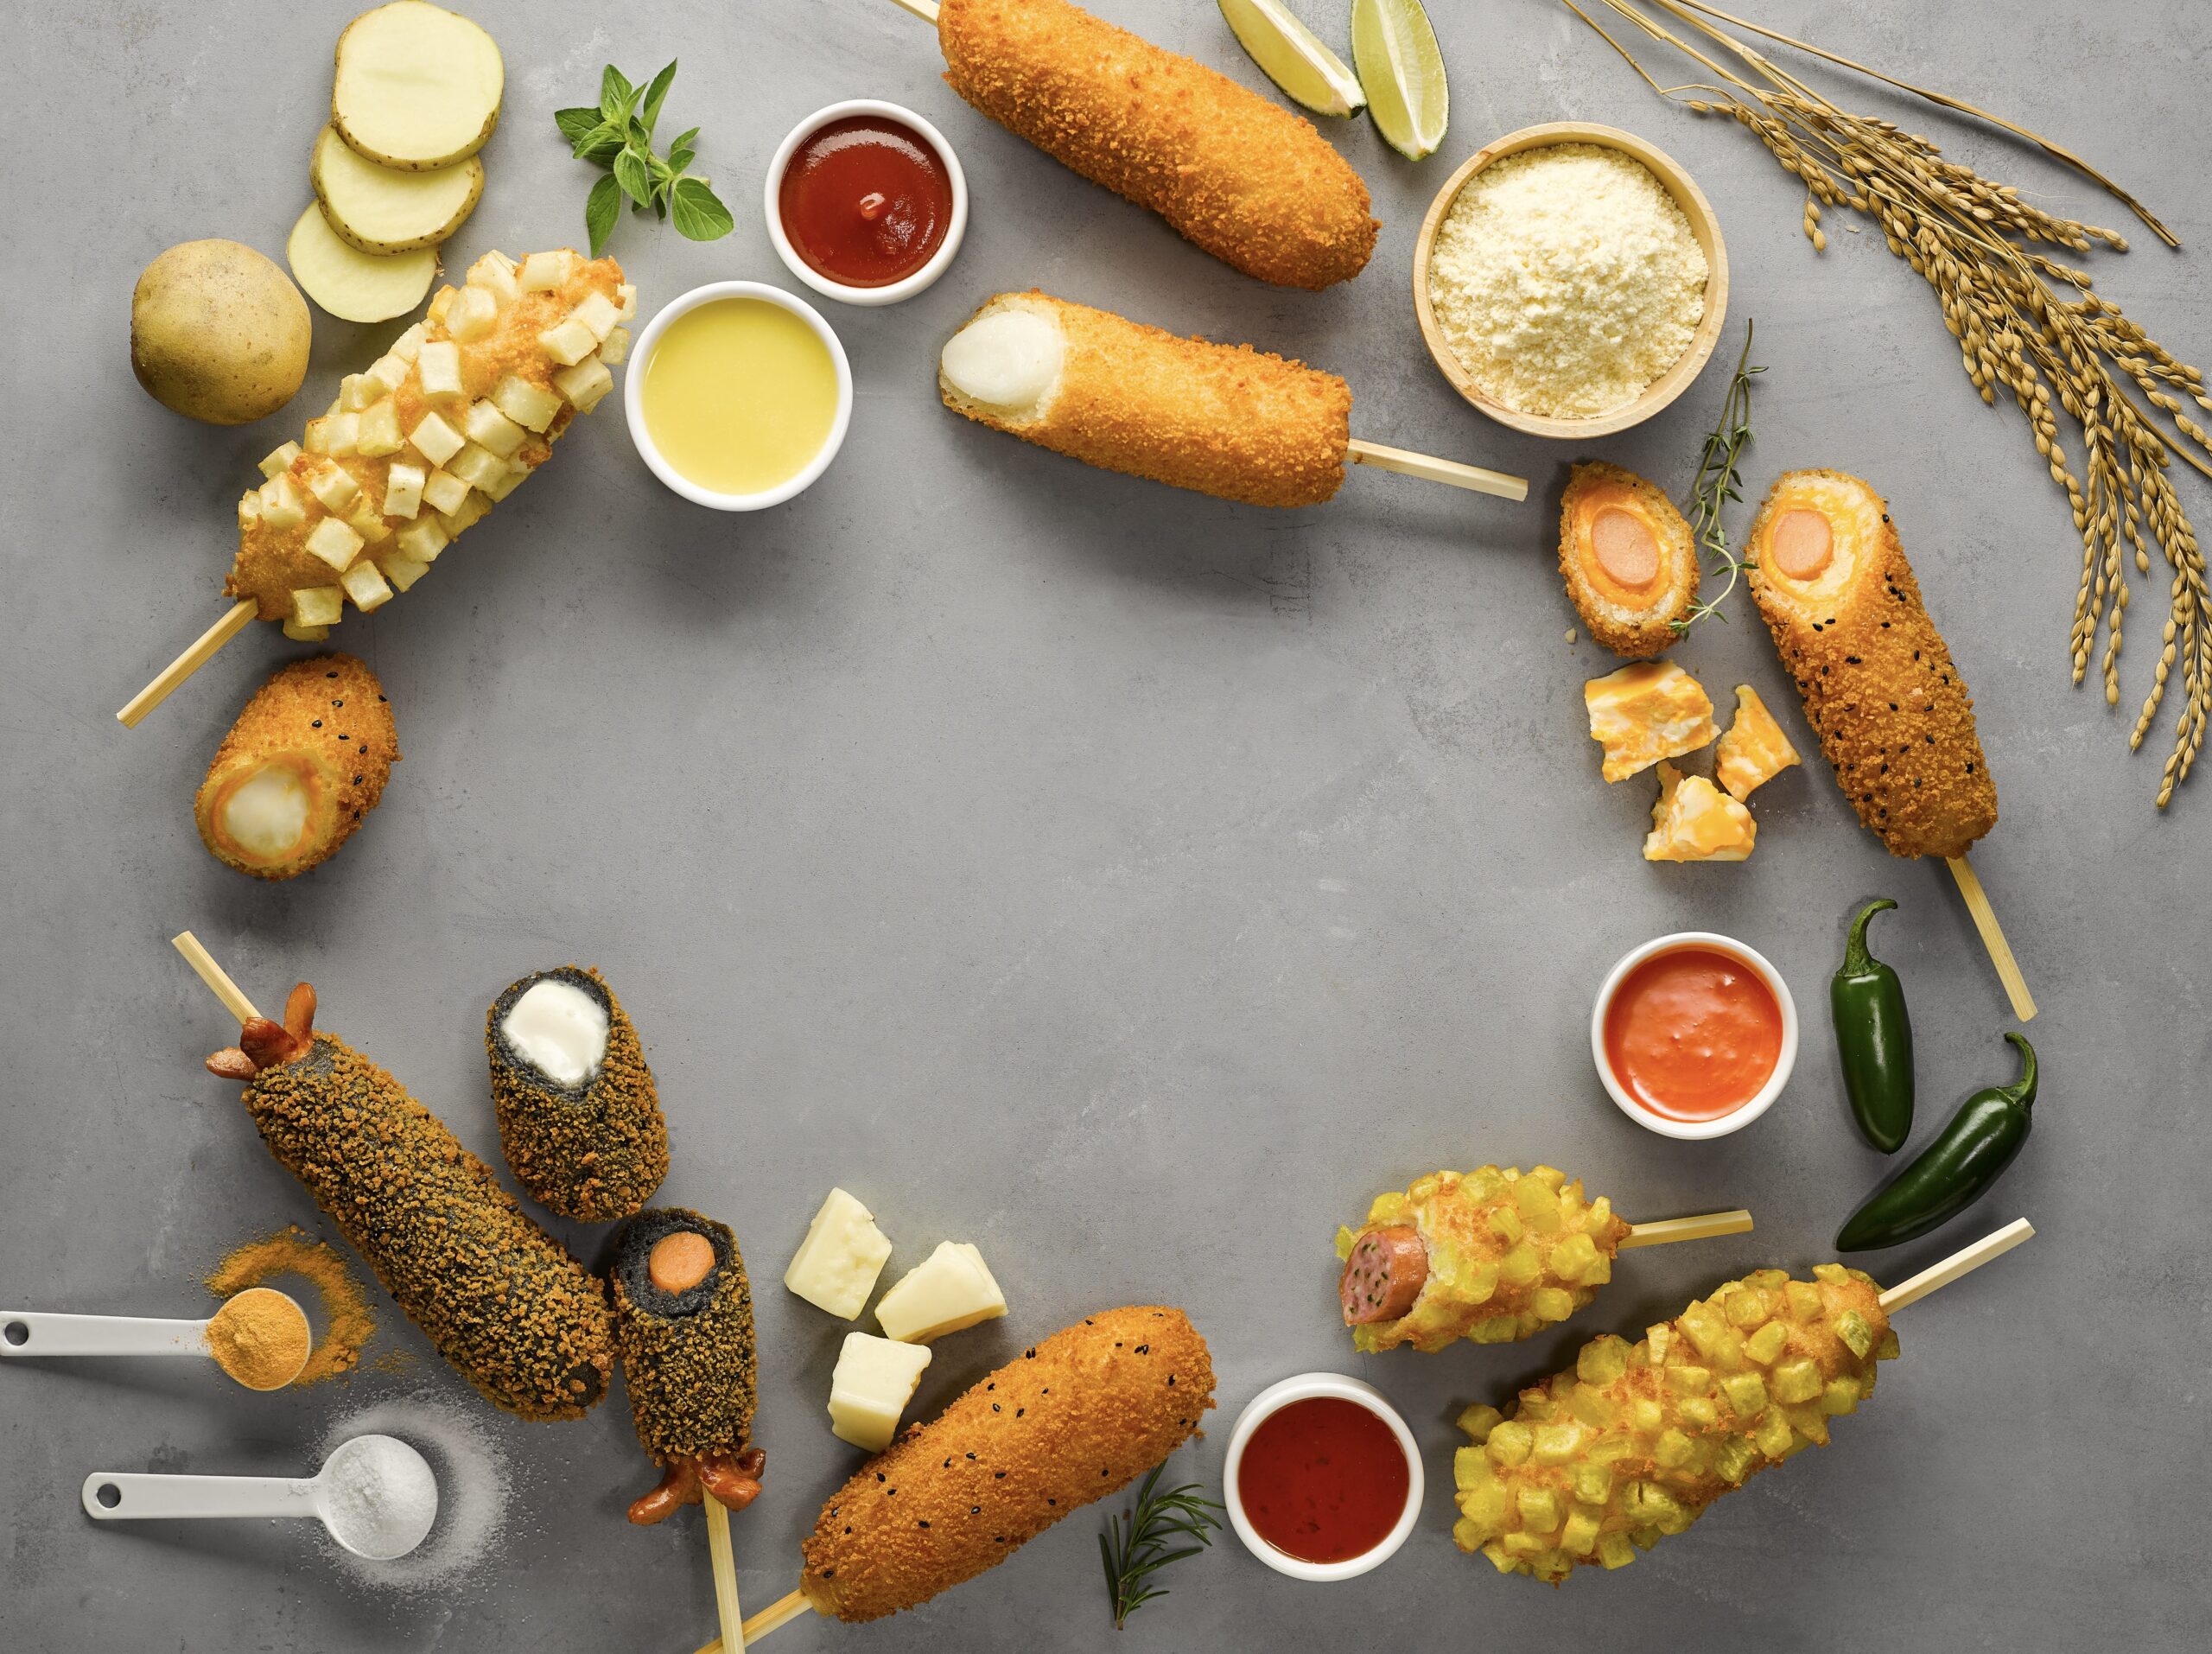 Korean Corn Dogs Are In London! Here's Where You Can Get Them